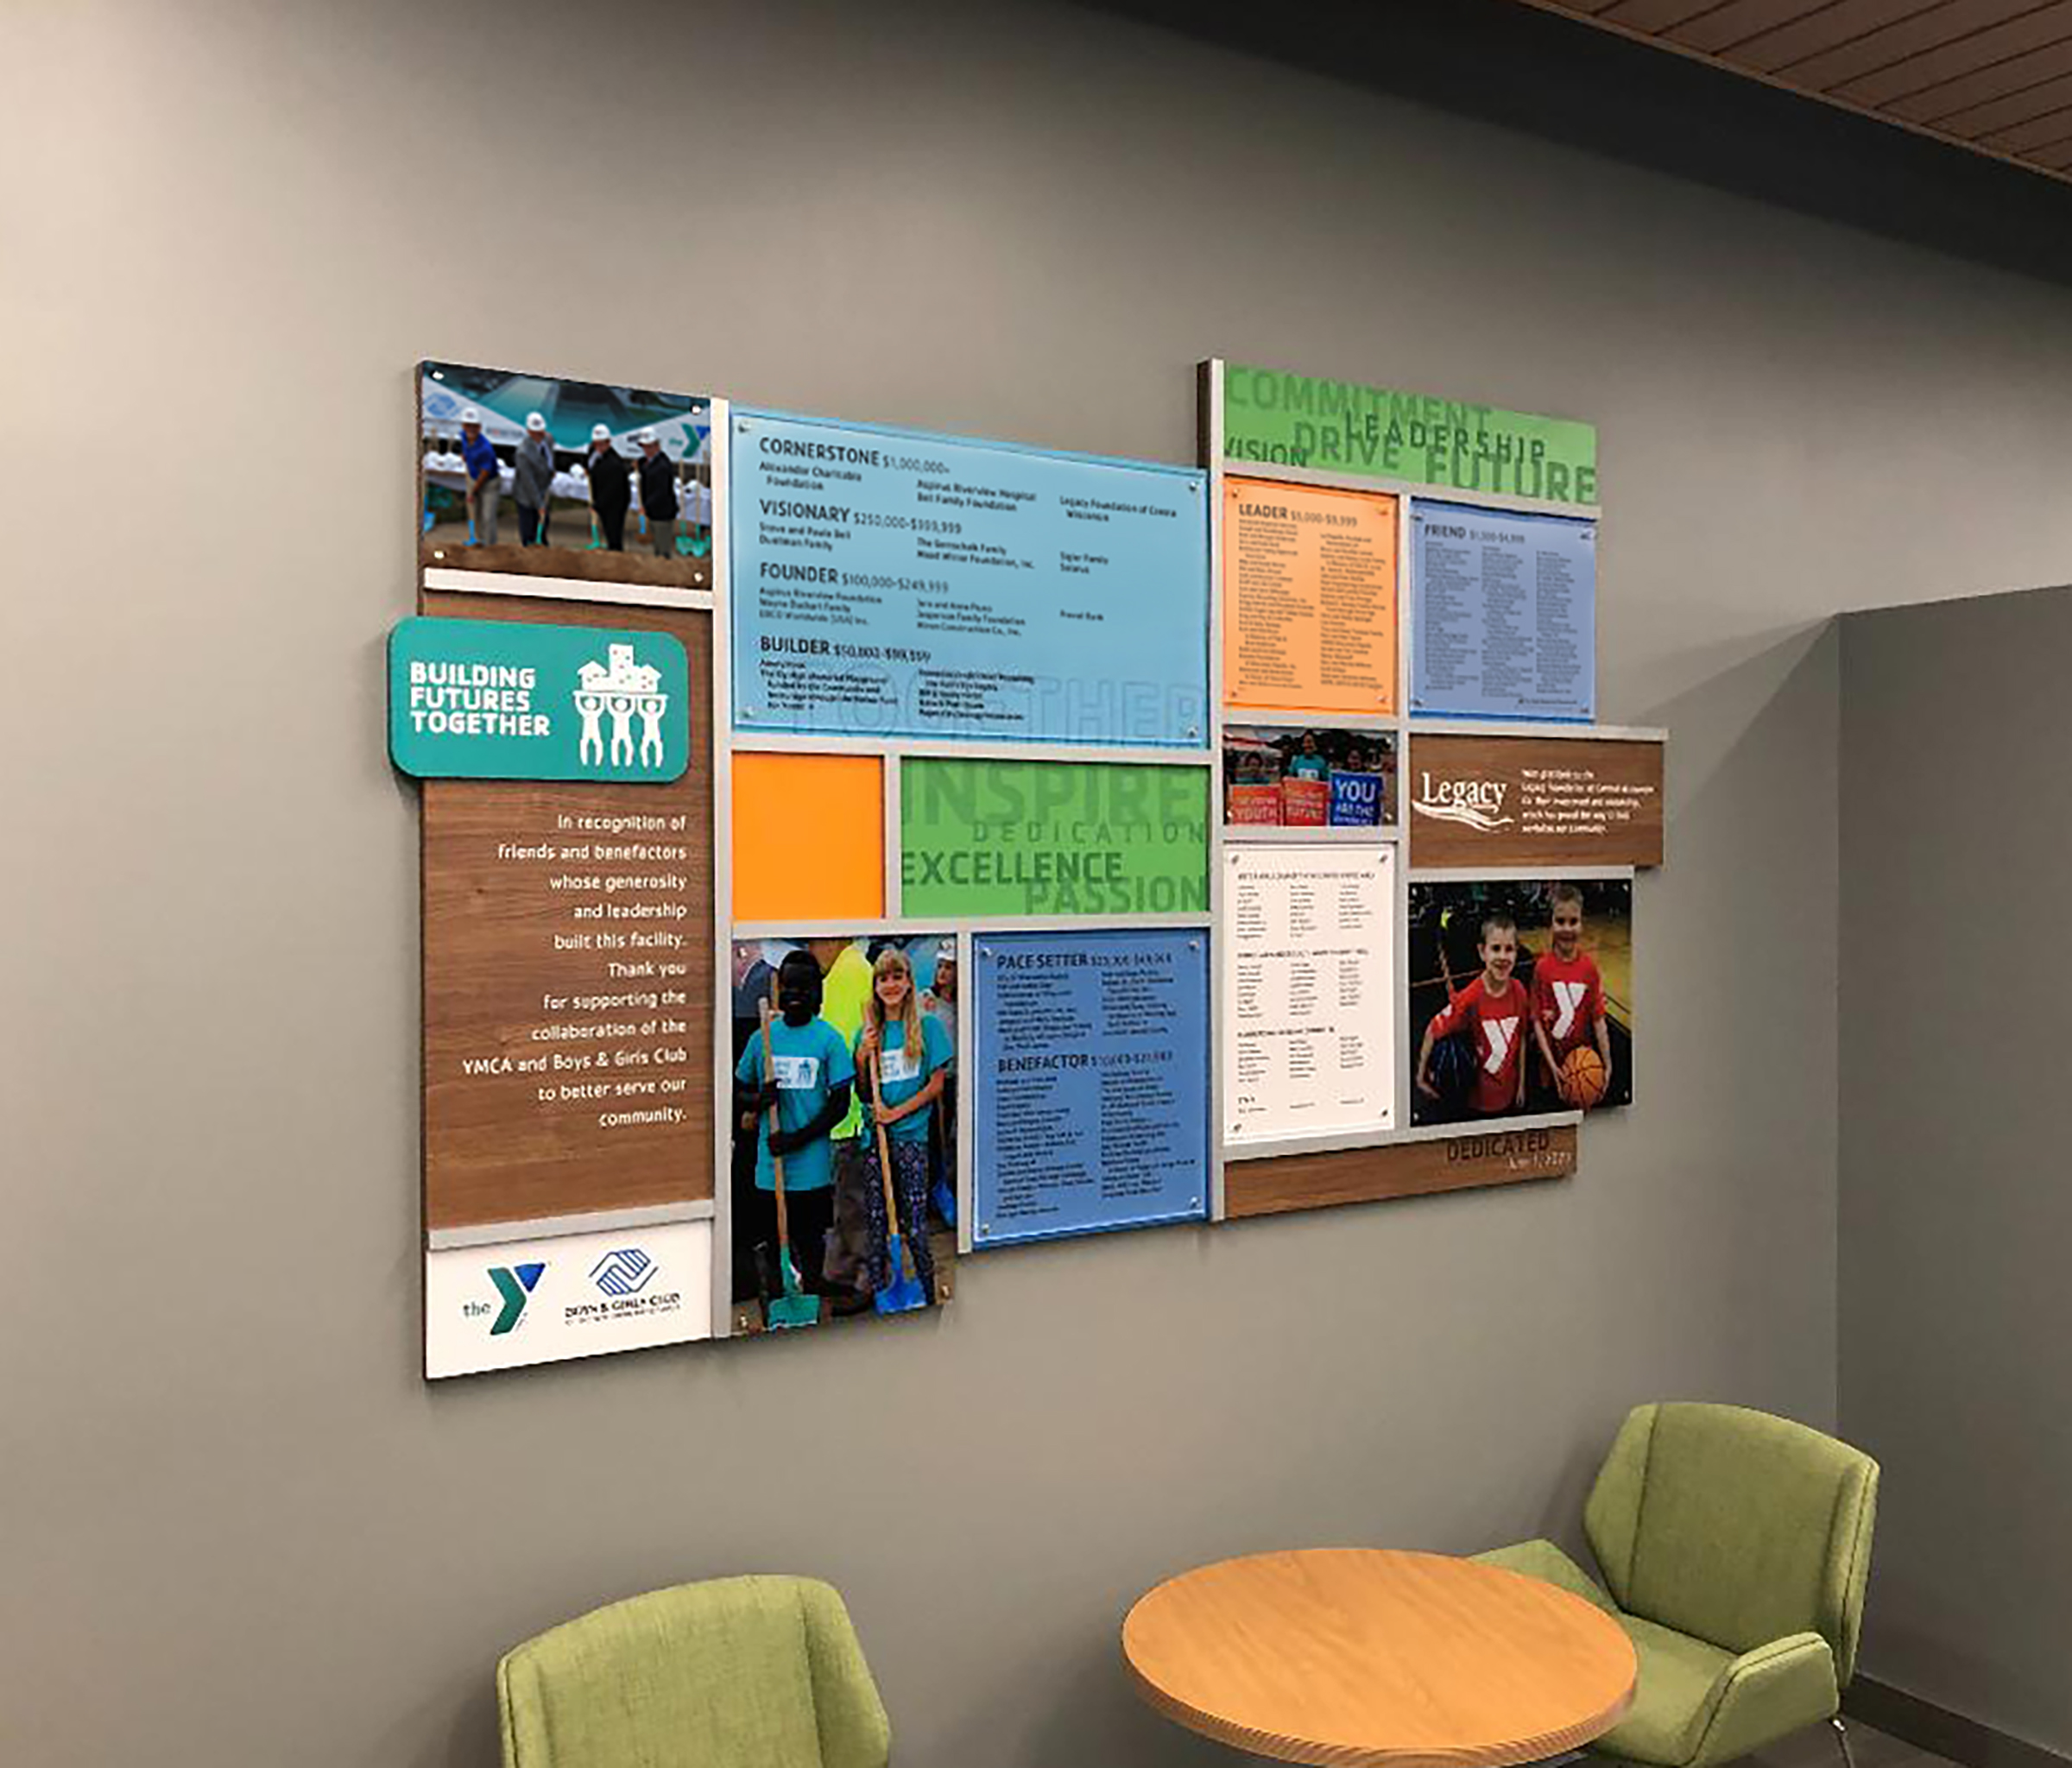 Capital Campaign, Clear Change, Large Printed Graphics, YMCA Display, Colorful Display, Mondrian Display, Changeable Display, Signage, Boys and Girls Club